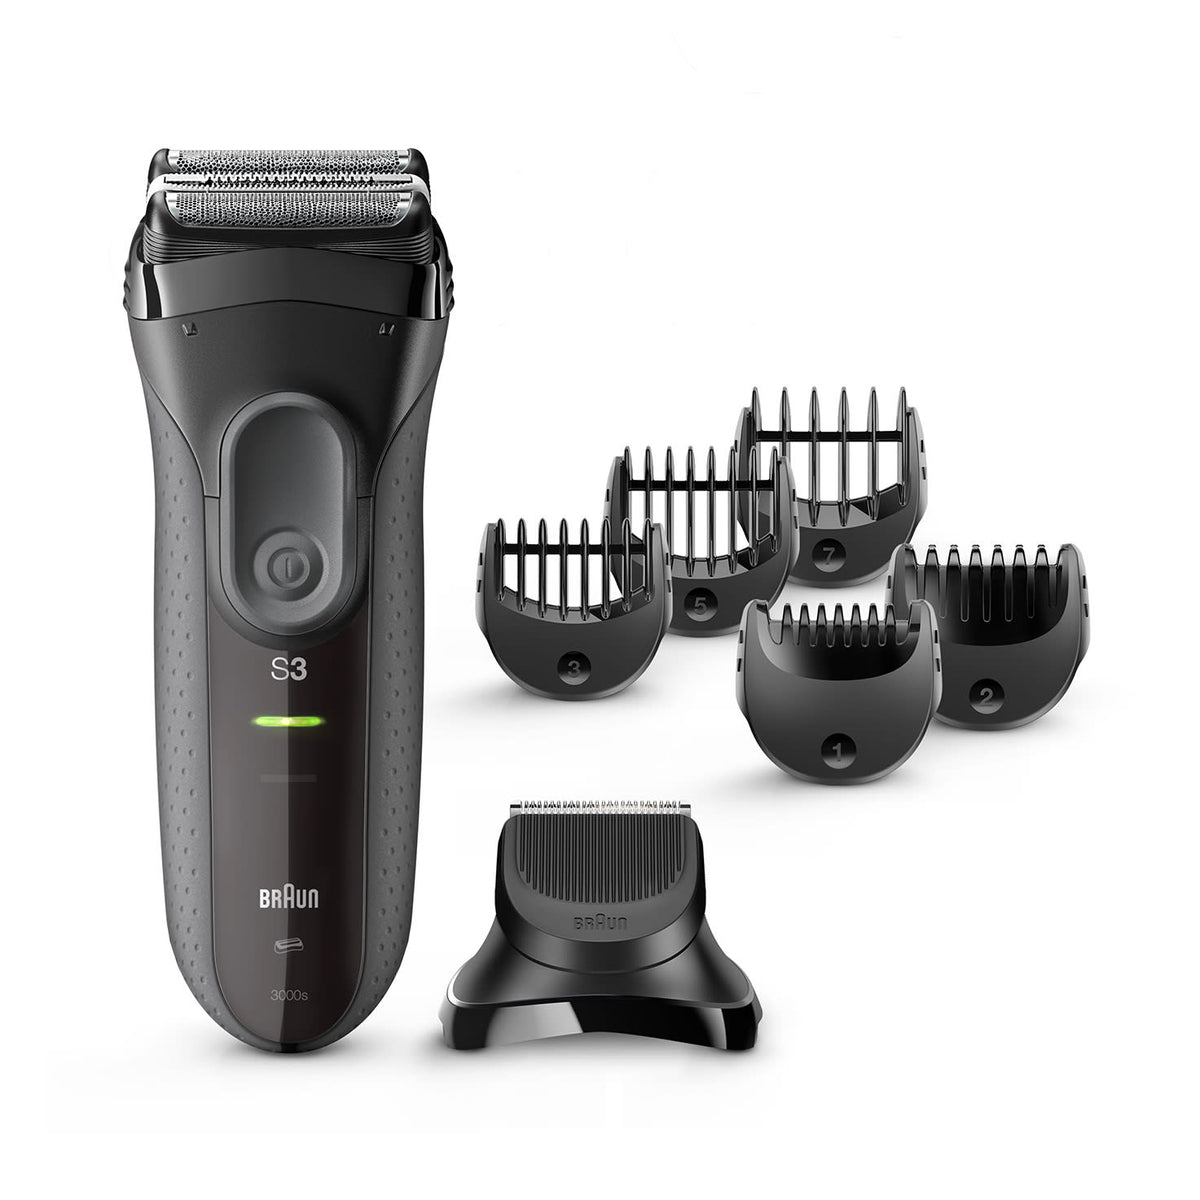 Braun Series 3 Shave&Style 3000BT shaver with trimmer head and 5 combs, grey.